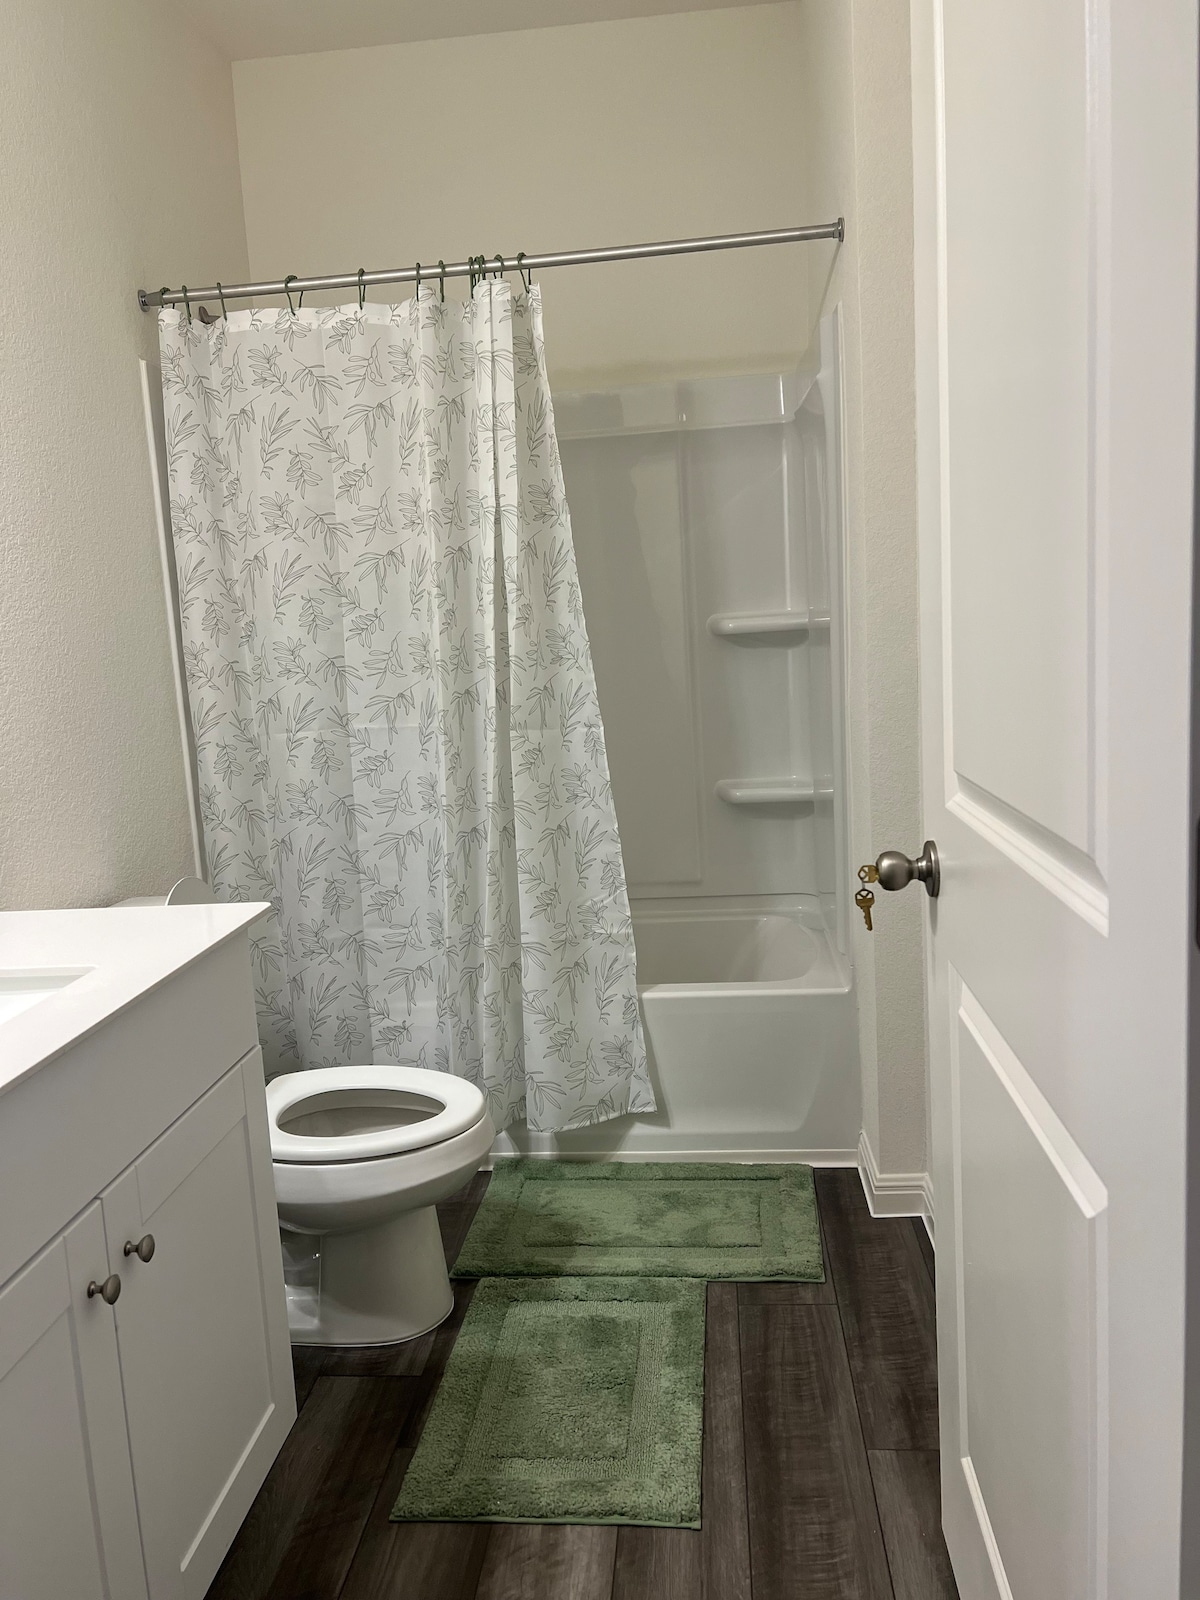 Brand New Bedroom With Full Bathroom. Hutto No. 1